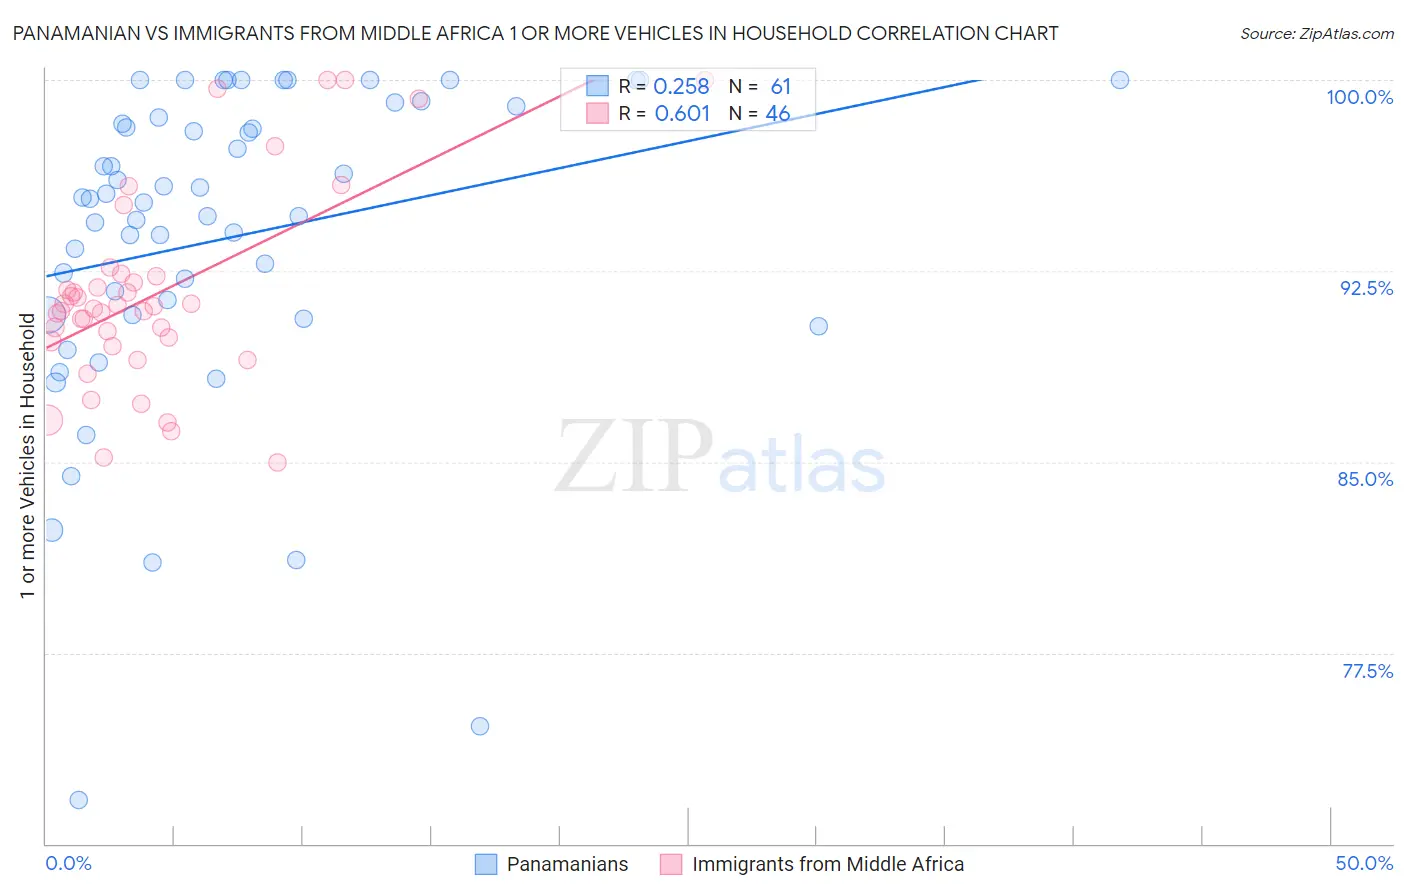 Panamanian vs Immigrants from Middle Africa 1 or more Vehicles in Household